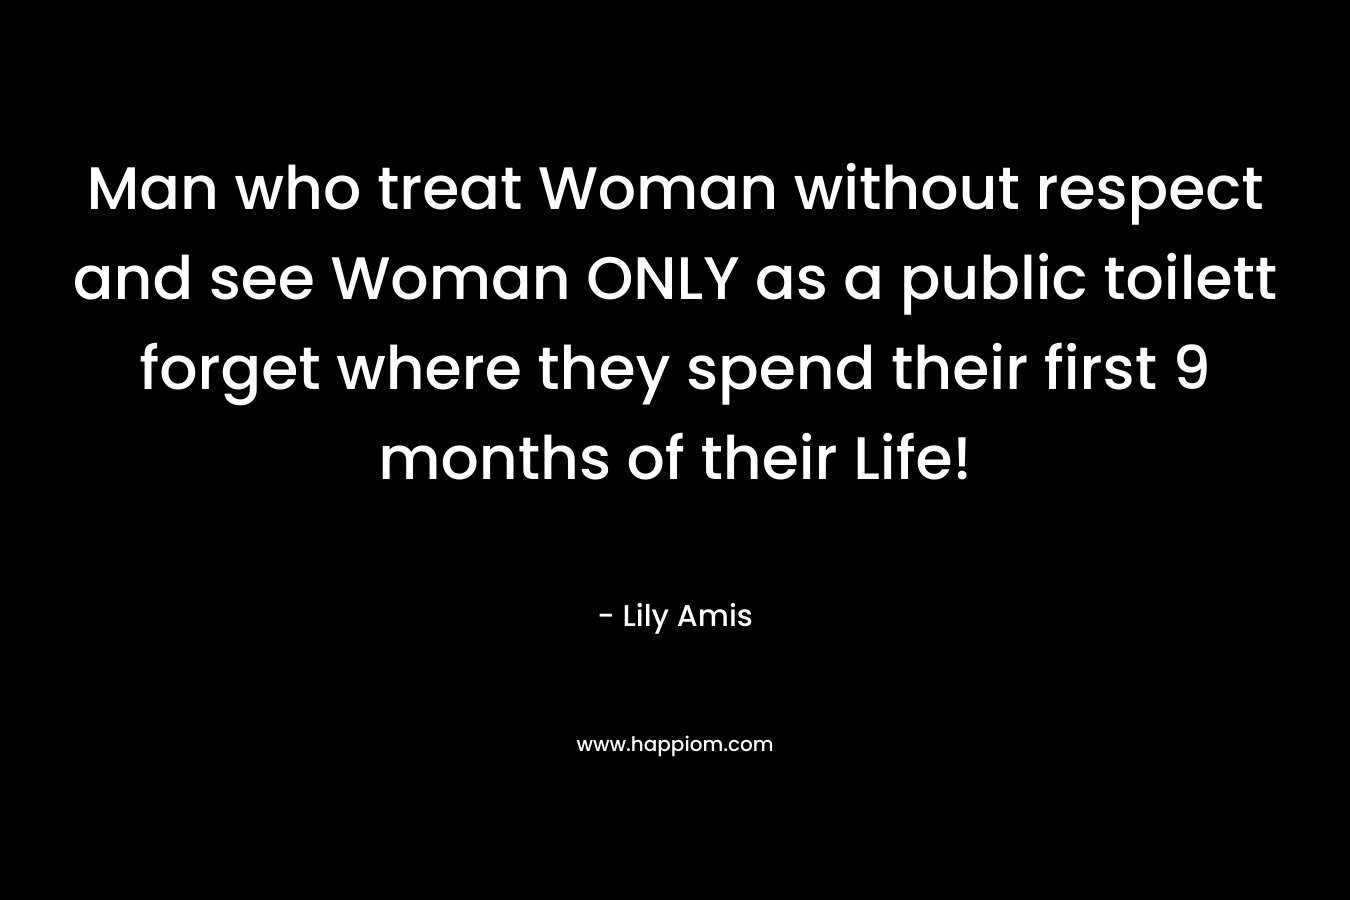 Man who treat Woman without respect and see Woman ONLY as a public toilett forget where they spend their first 9 months of their Life! – Lily Amis